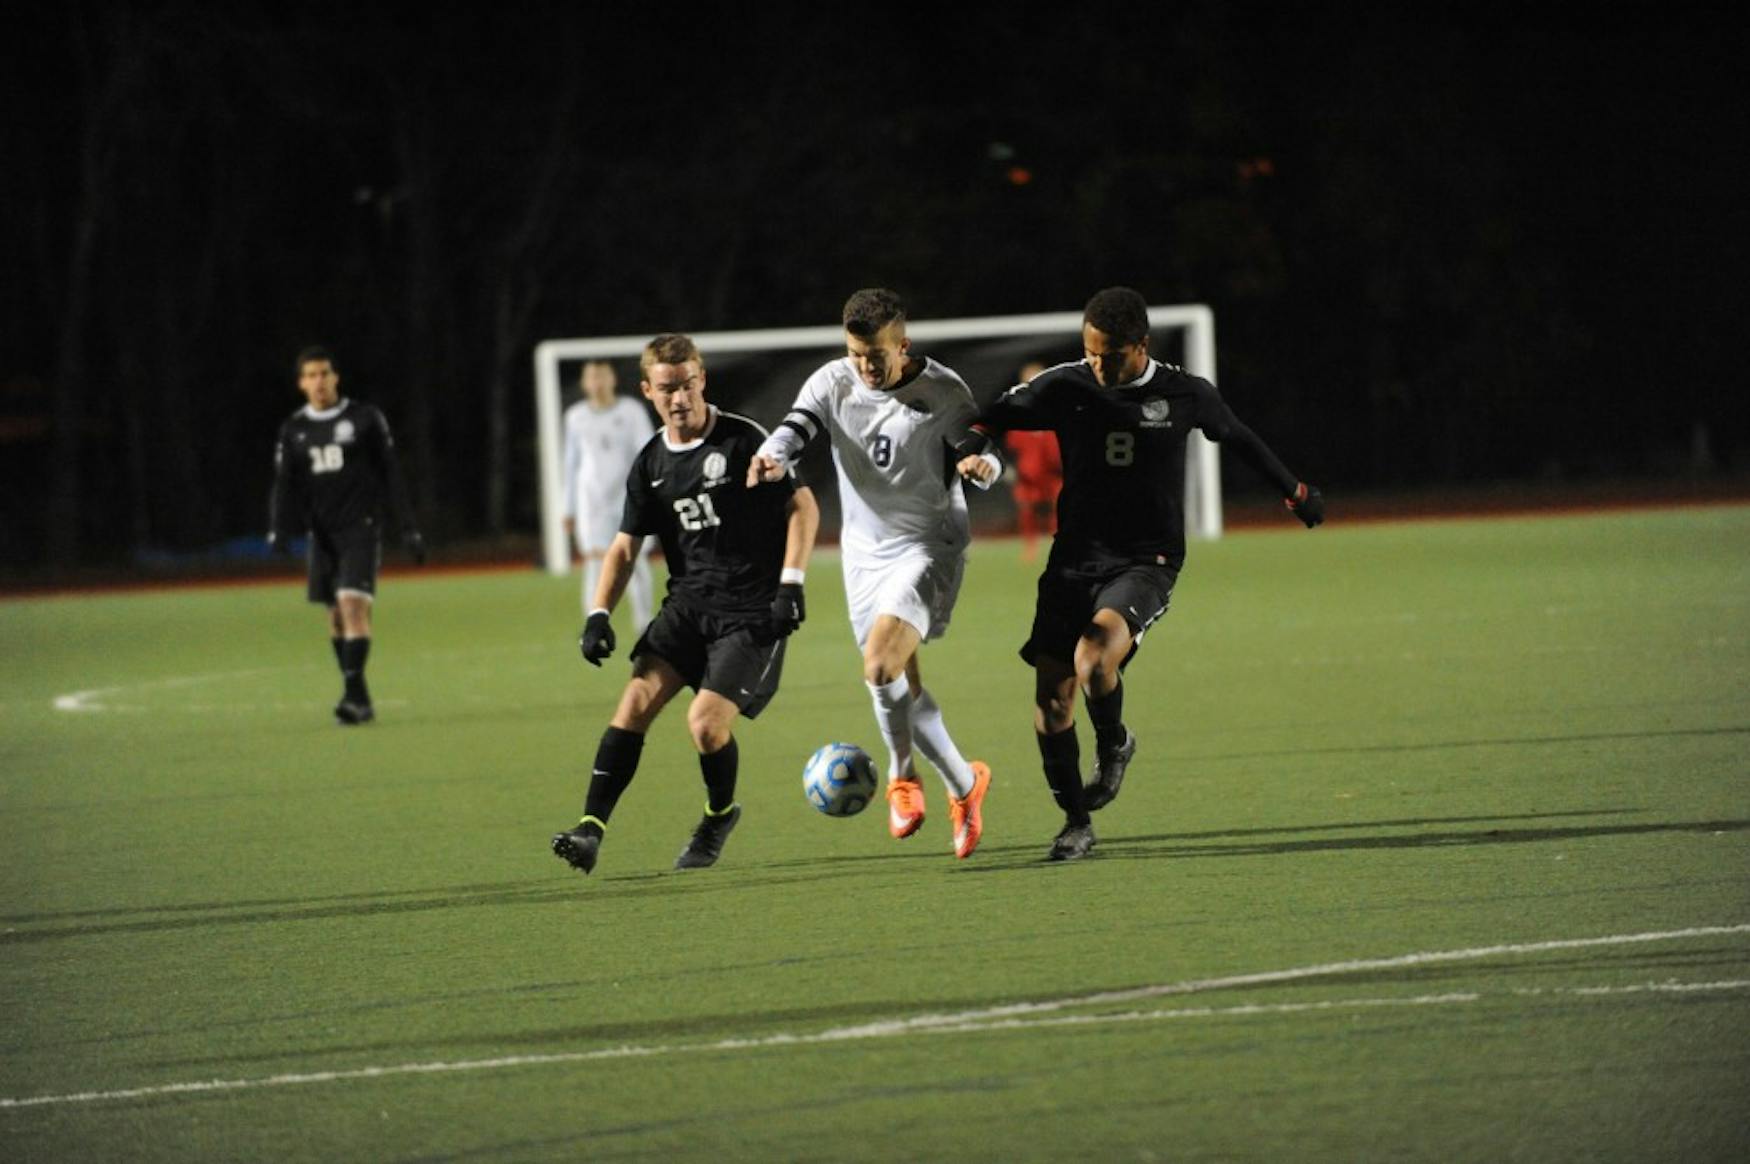 FIRST TOUCH: Forward Tyler Savonen ’15 (center) cuts through two defenders during the team’s 1-0 win against Bowdoin College.